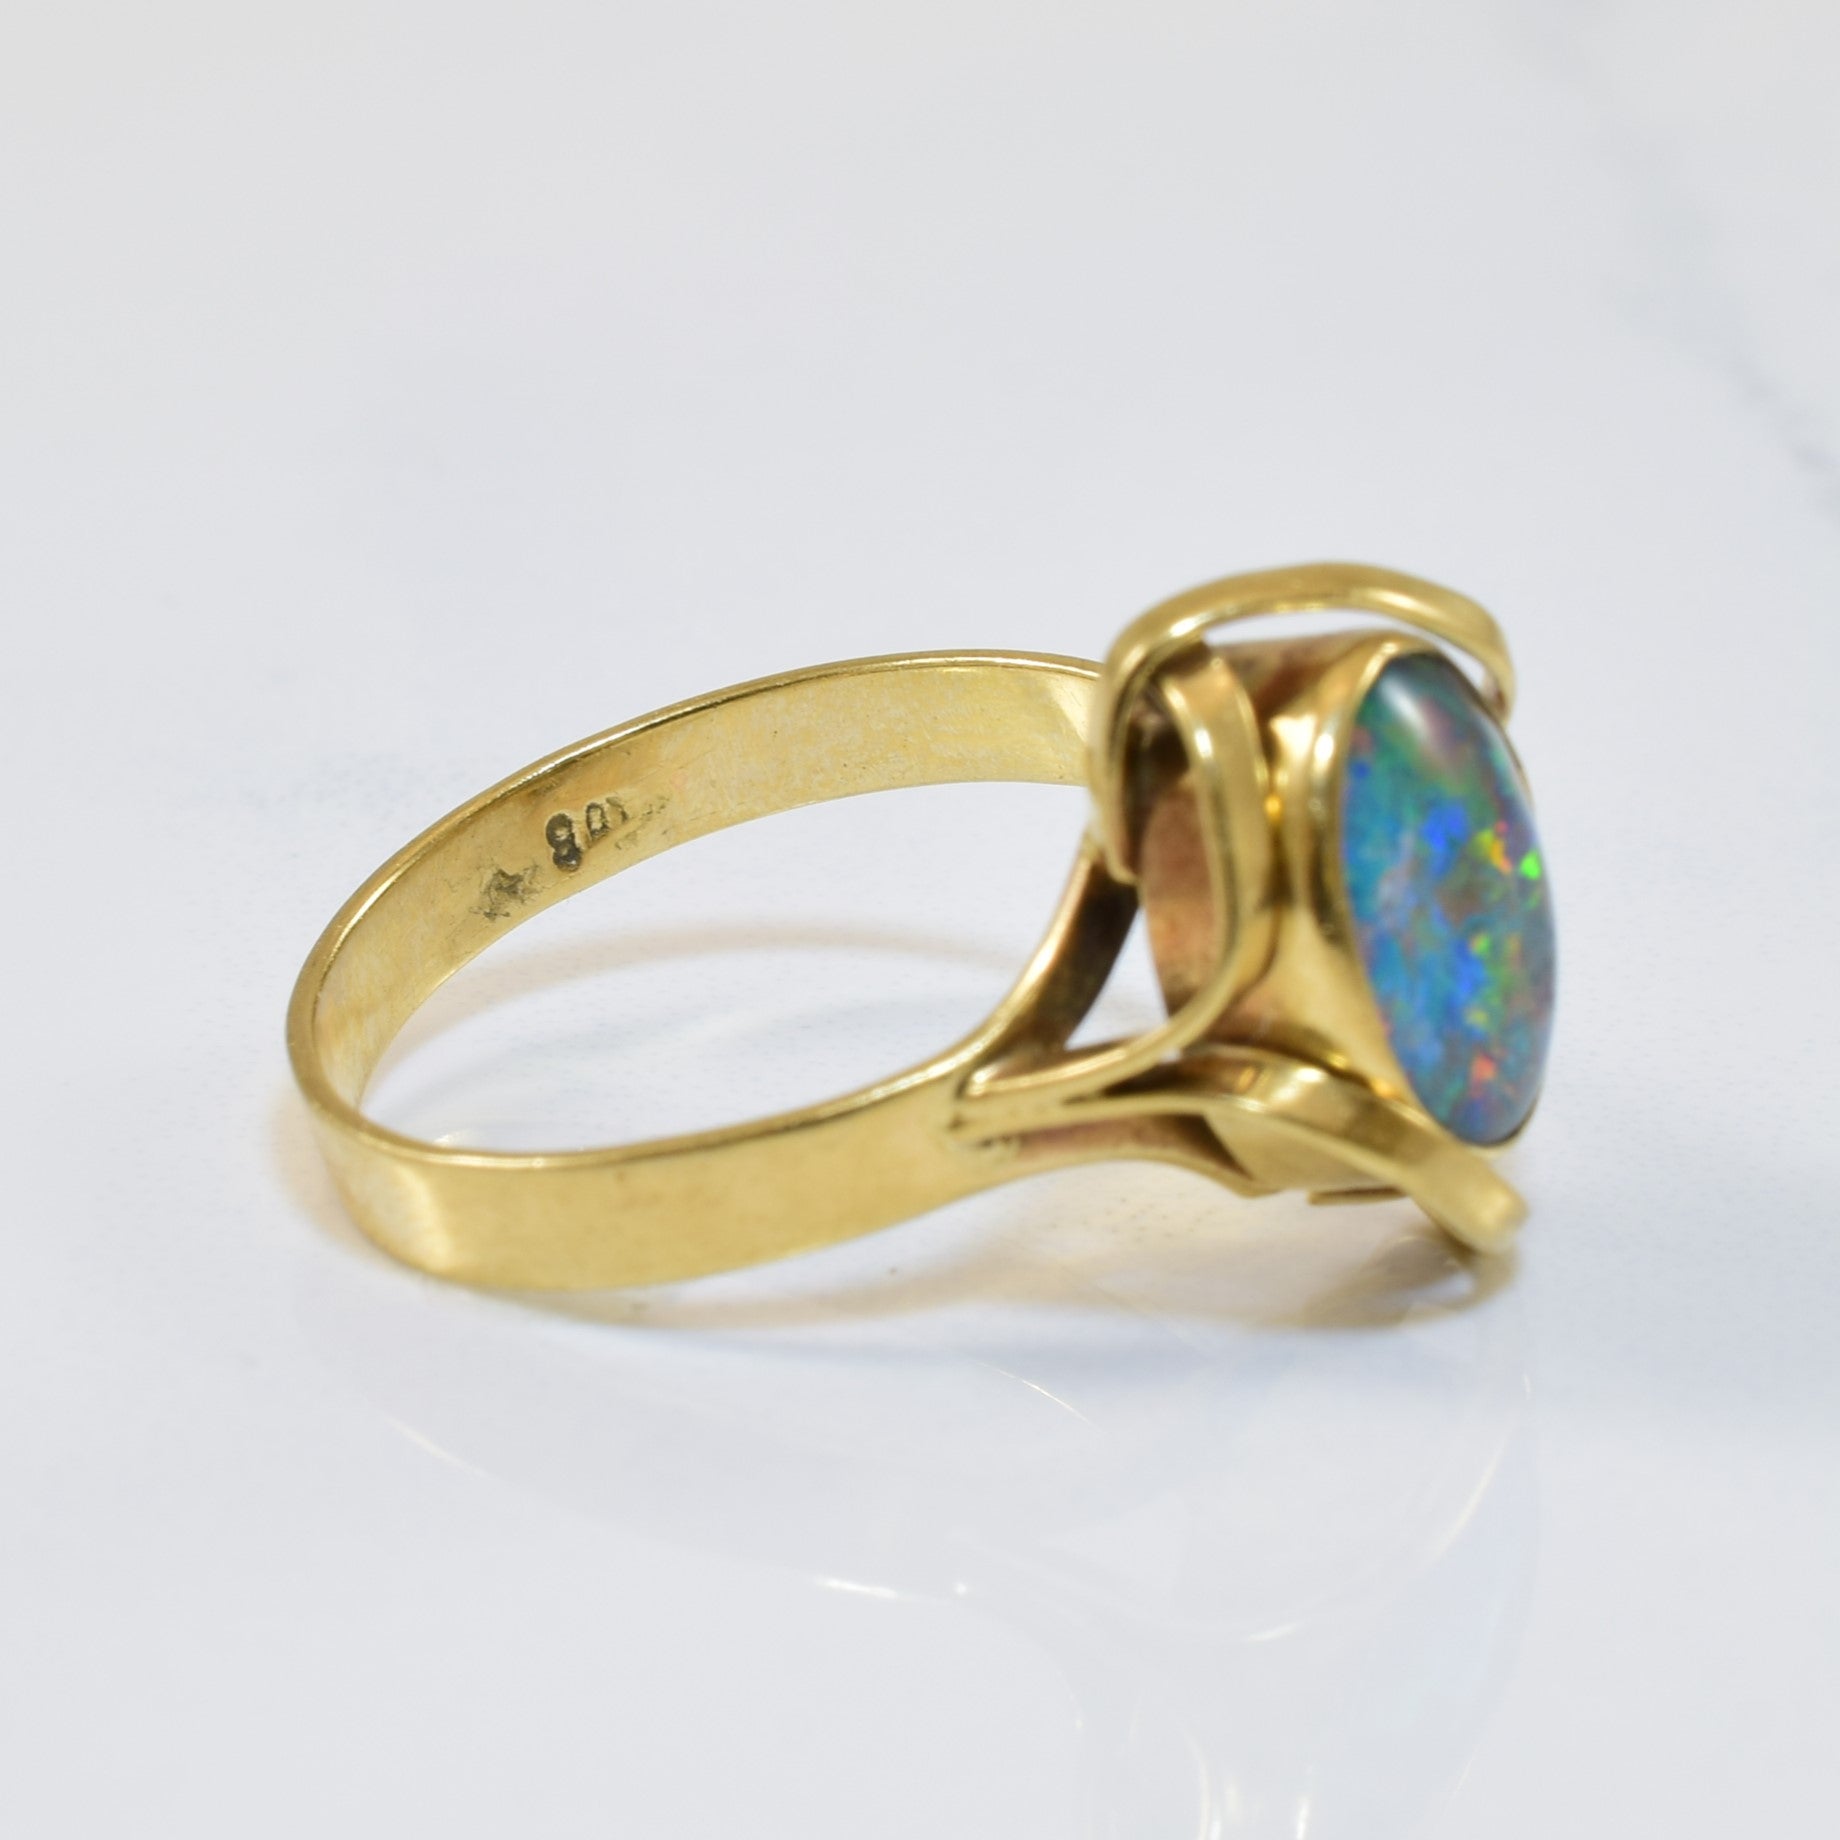 Opal Triplet Cocktail Ring | 1.45ct | SZ 7.25 |